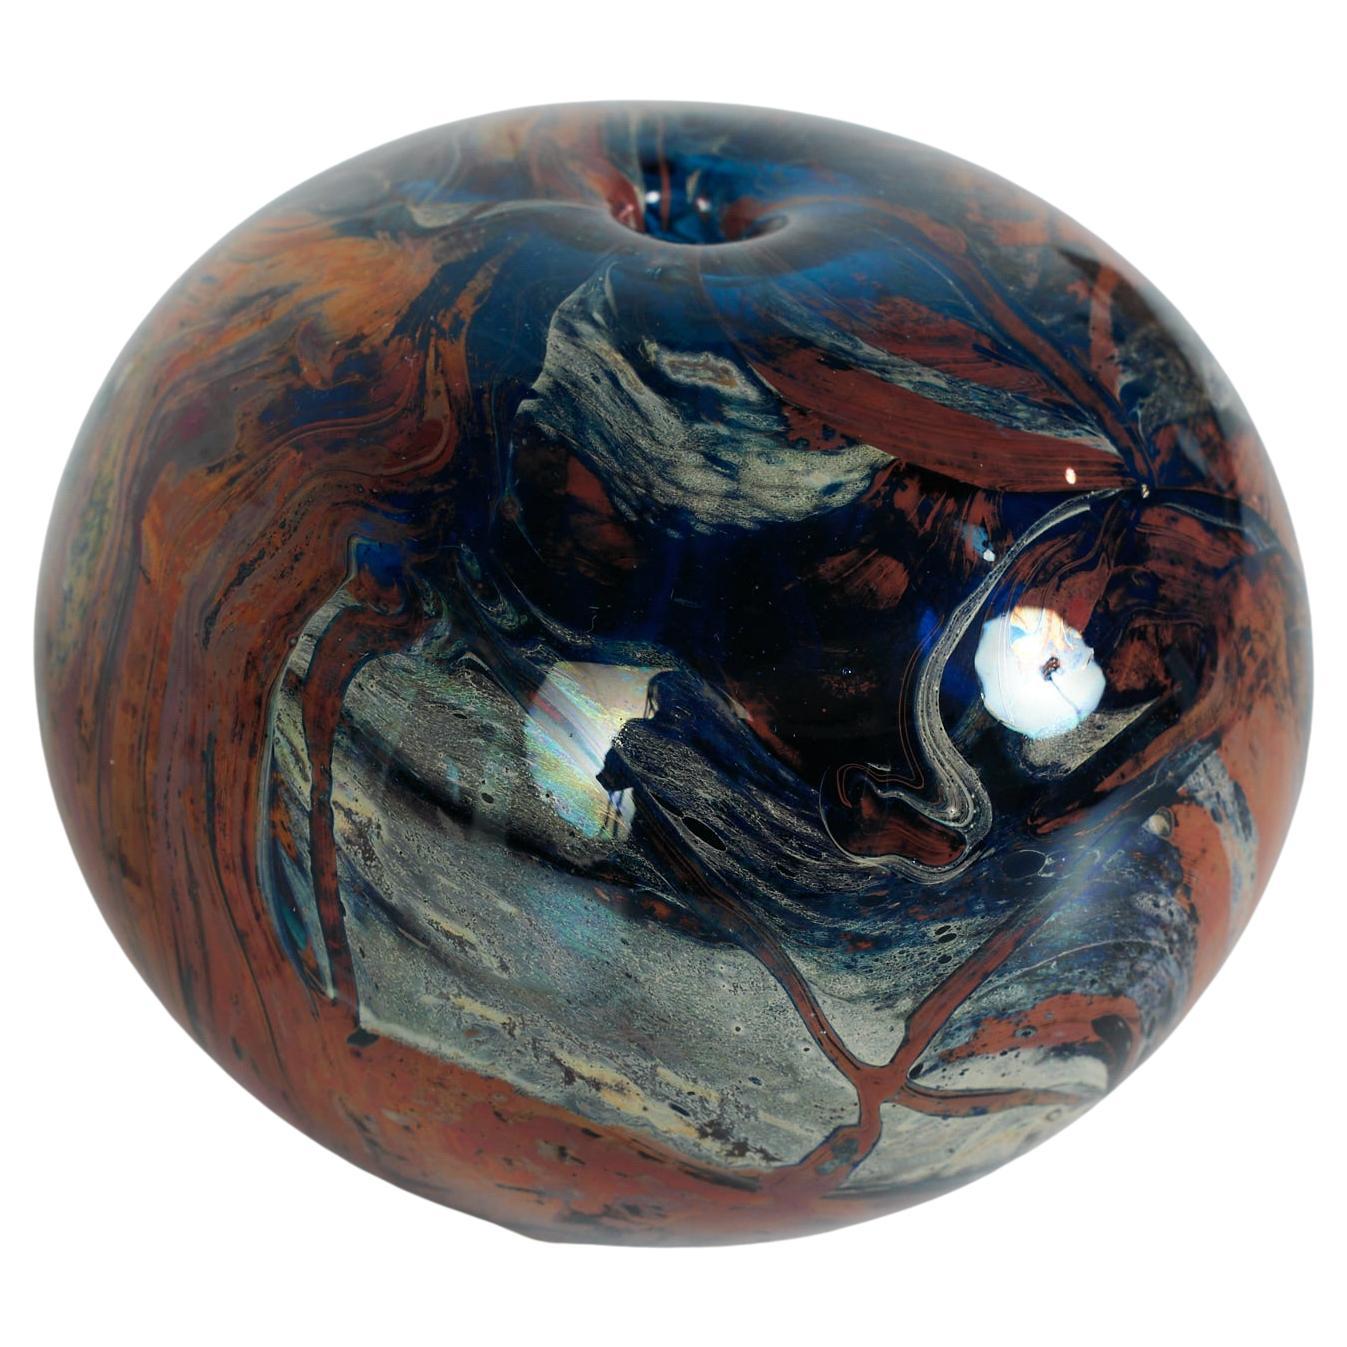 Round bud vase in marbled glass. The vase features a marbled glass in a rich blue, burgundy and cream swirled effect. 

Dimensions:
4